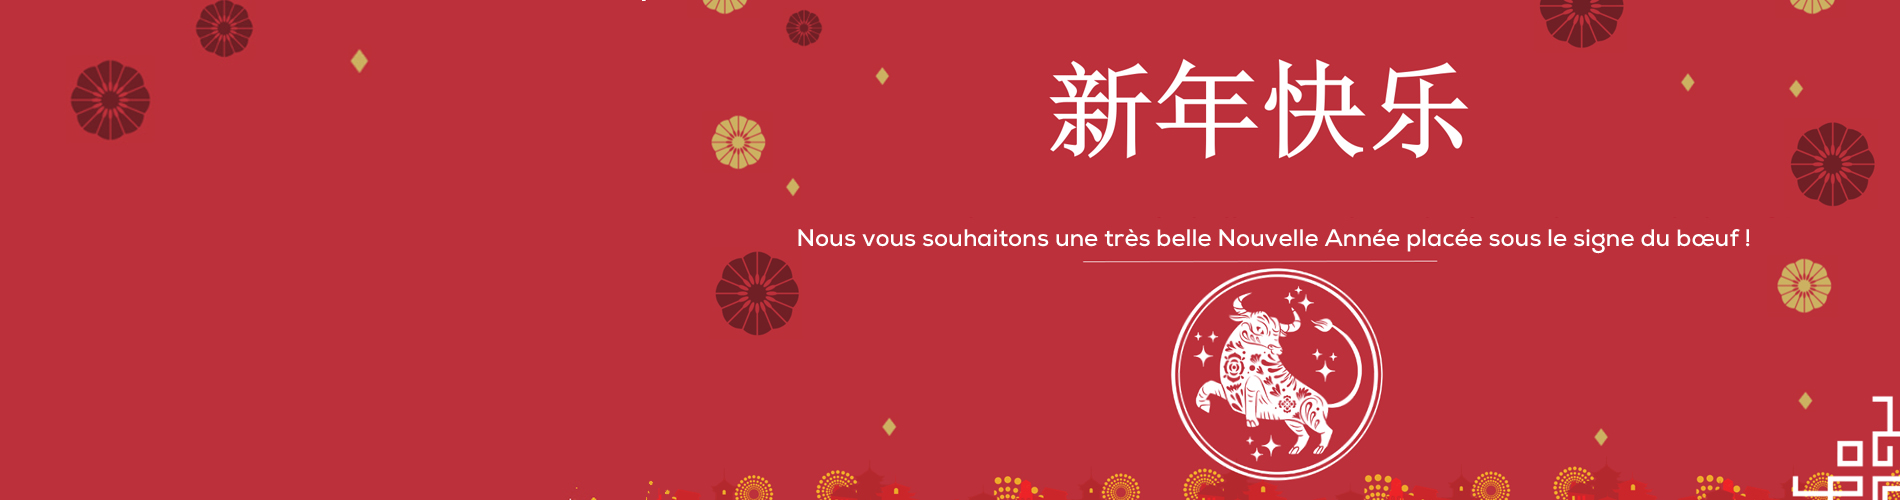 banner_new_year_chinese_fr_homepage